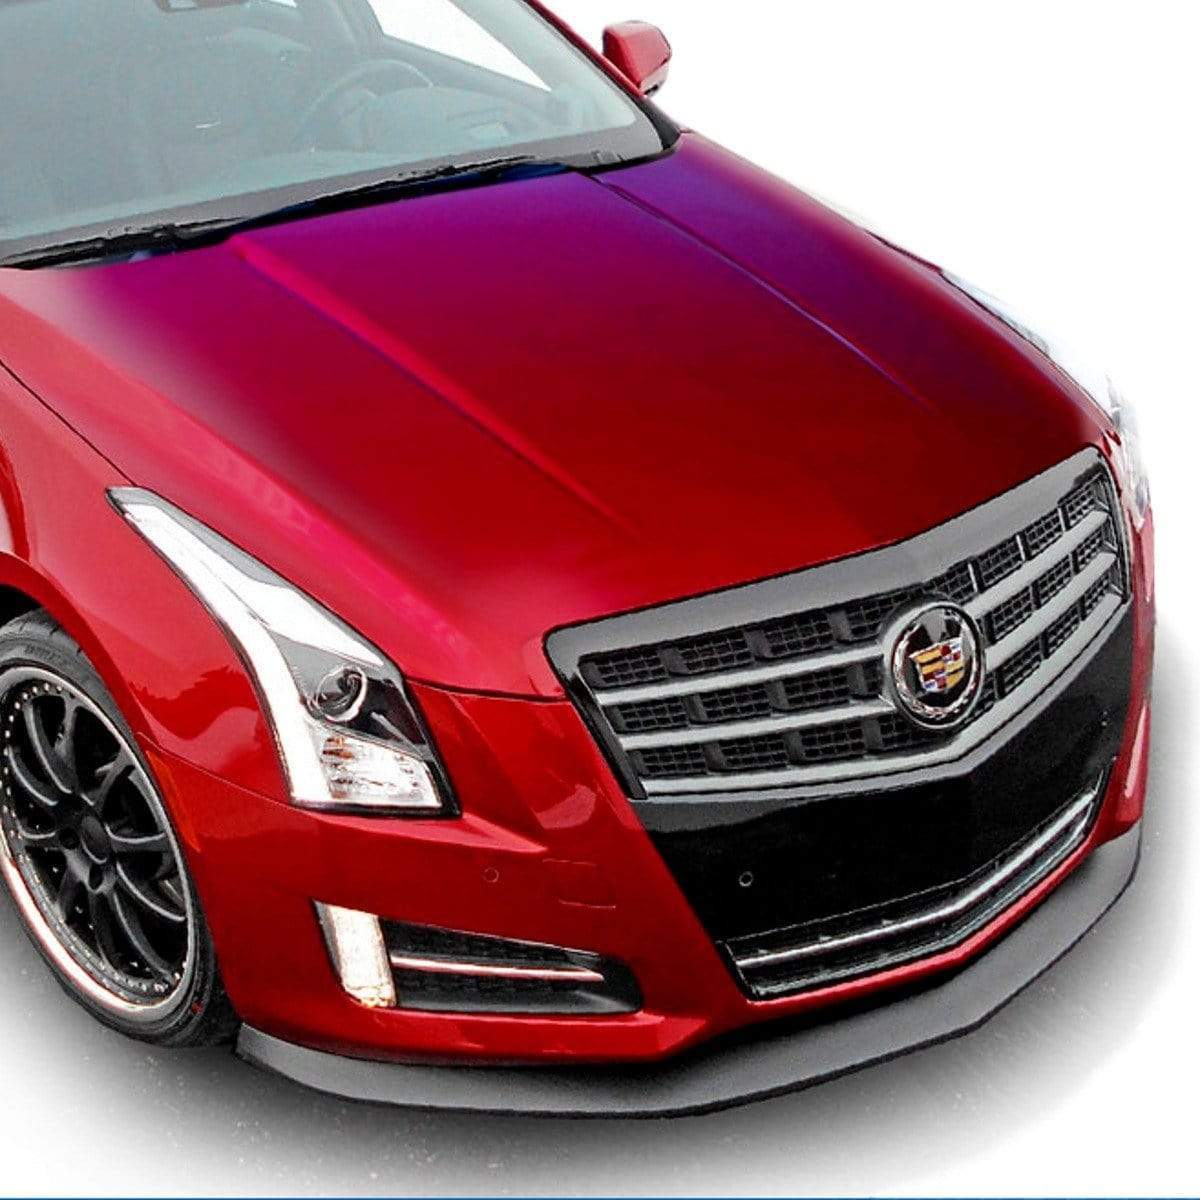 ACS Composite Front Splitter for Cadillac ATS [44-4-001|44-4-003]PRM - Aerodynamic and fuel-efficient upgrade for your vehicle